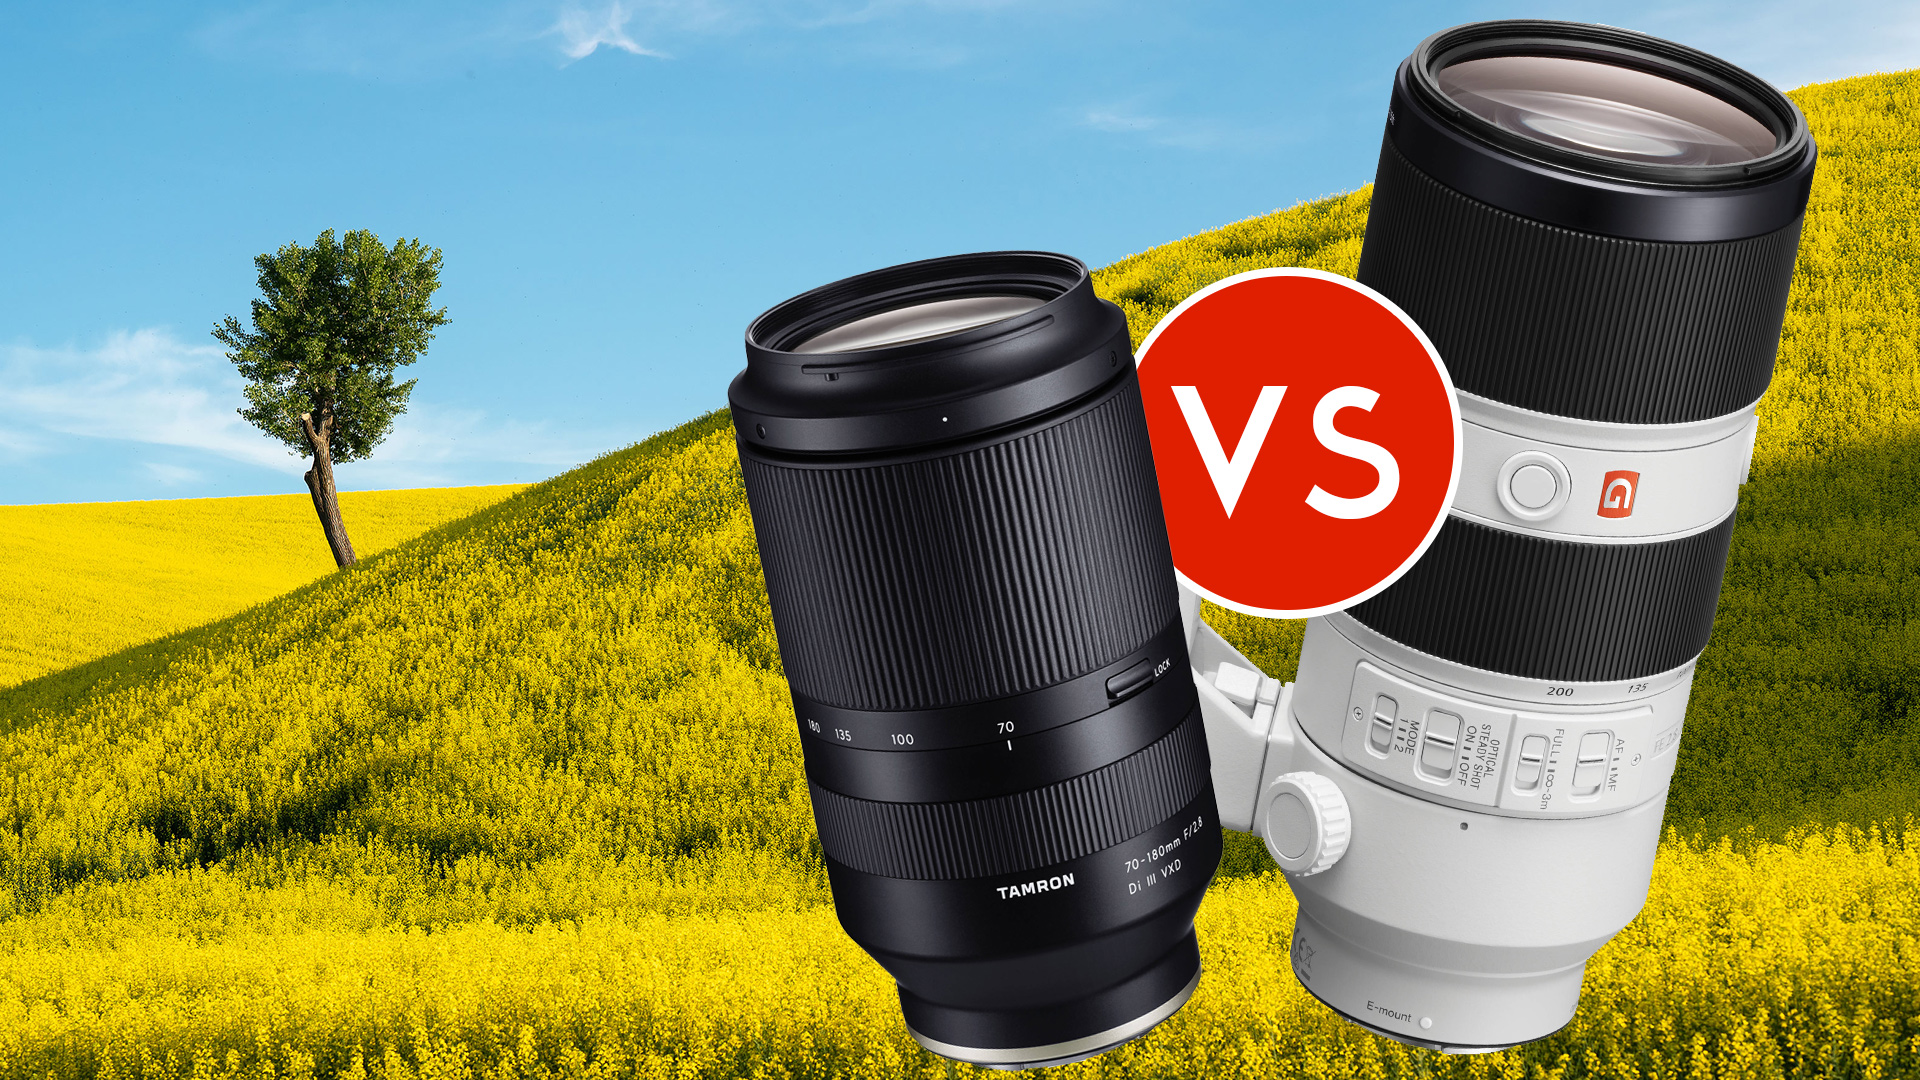 Tamron 70 180 F 2 8 Vs Sony 70 0 F 2 8 Gm Comparison Review Light And Matter